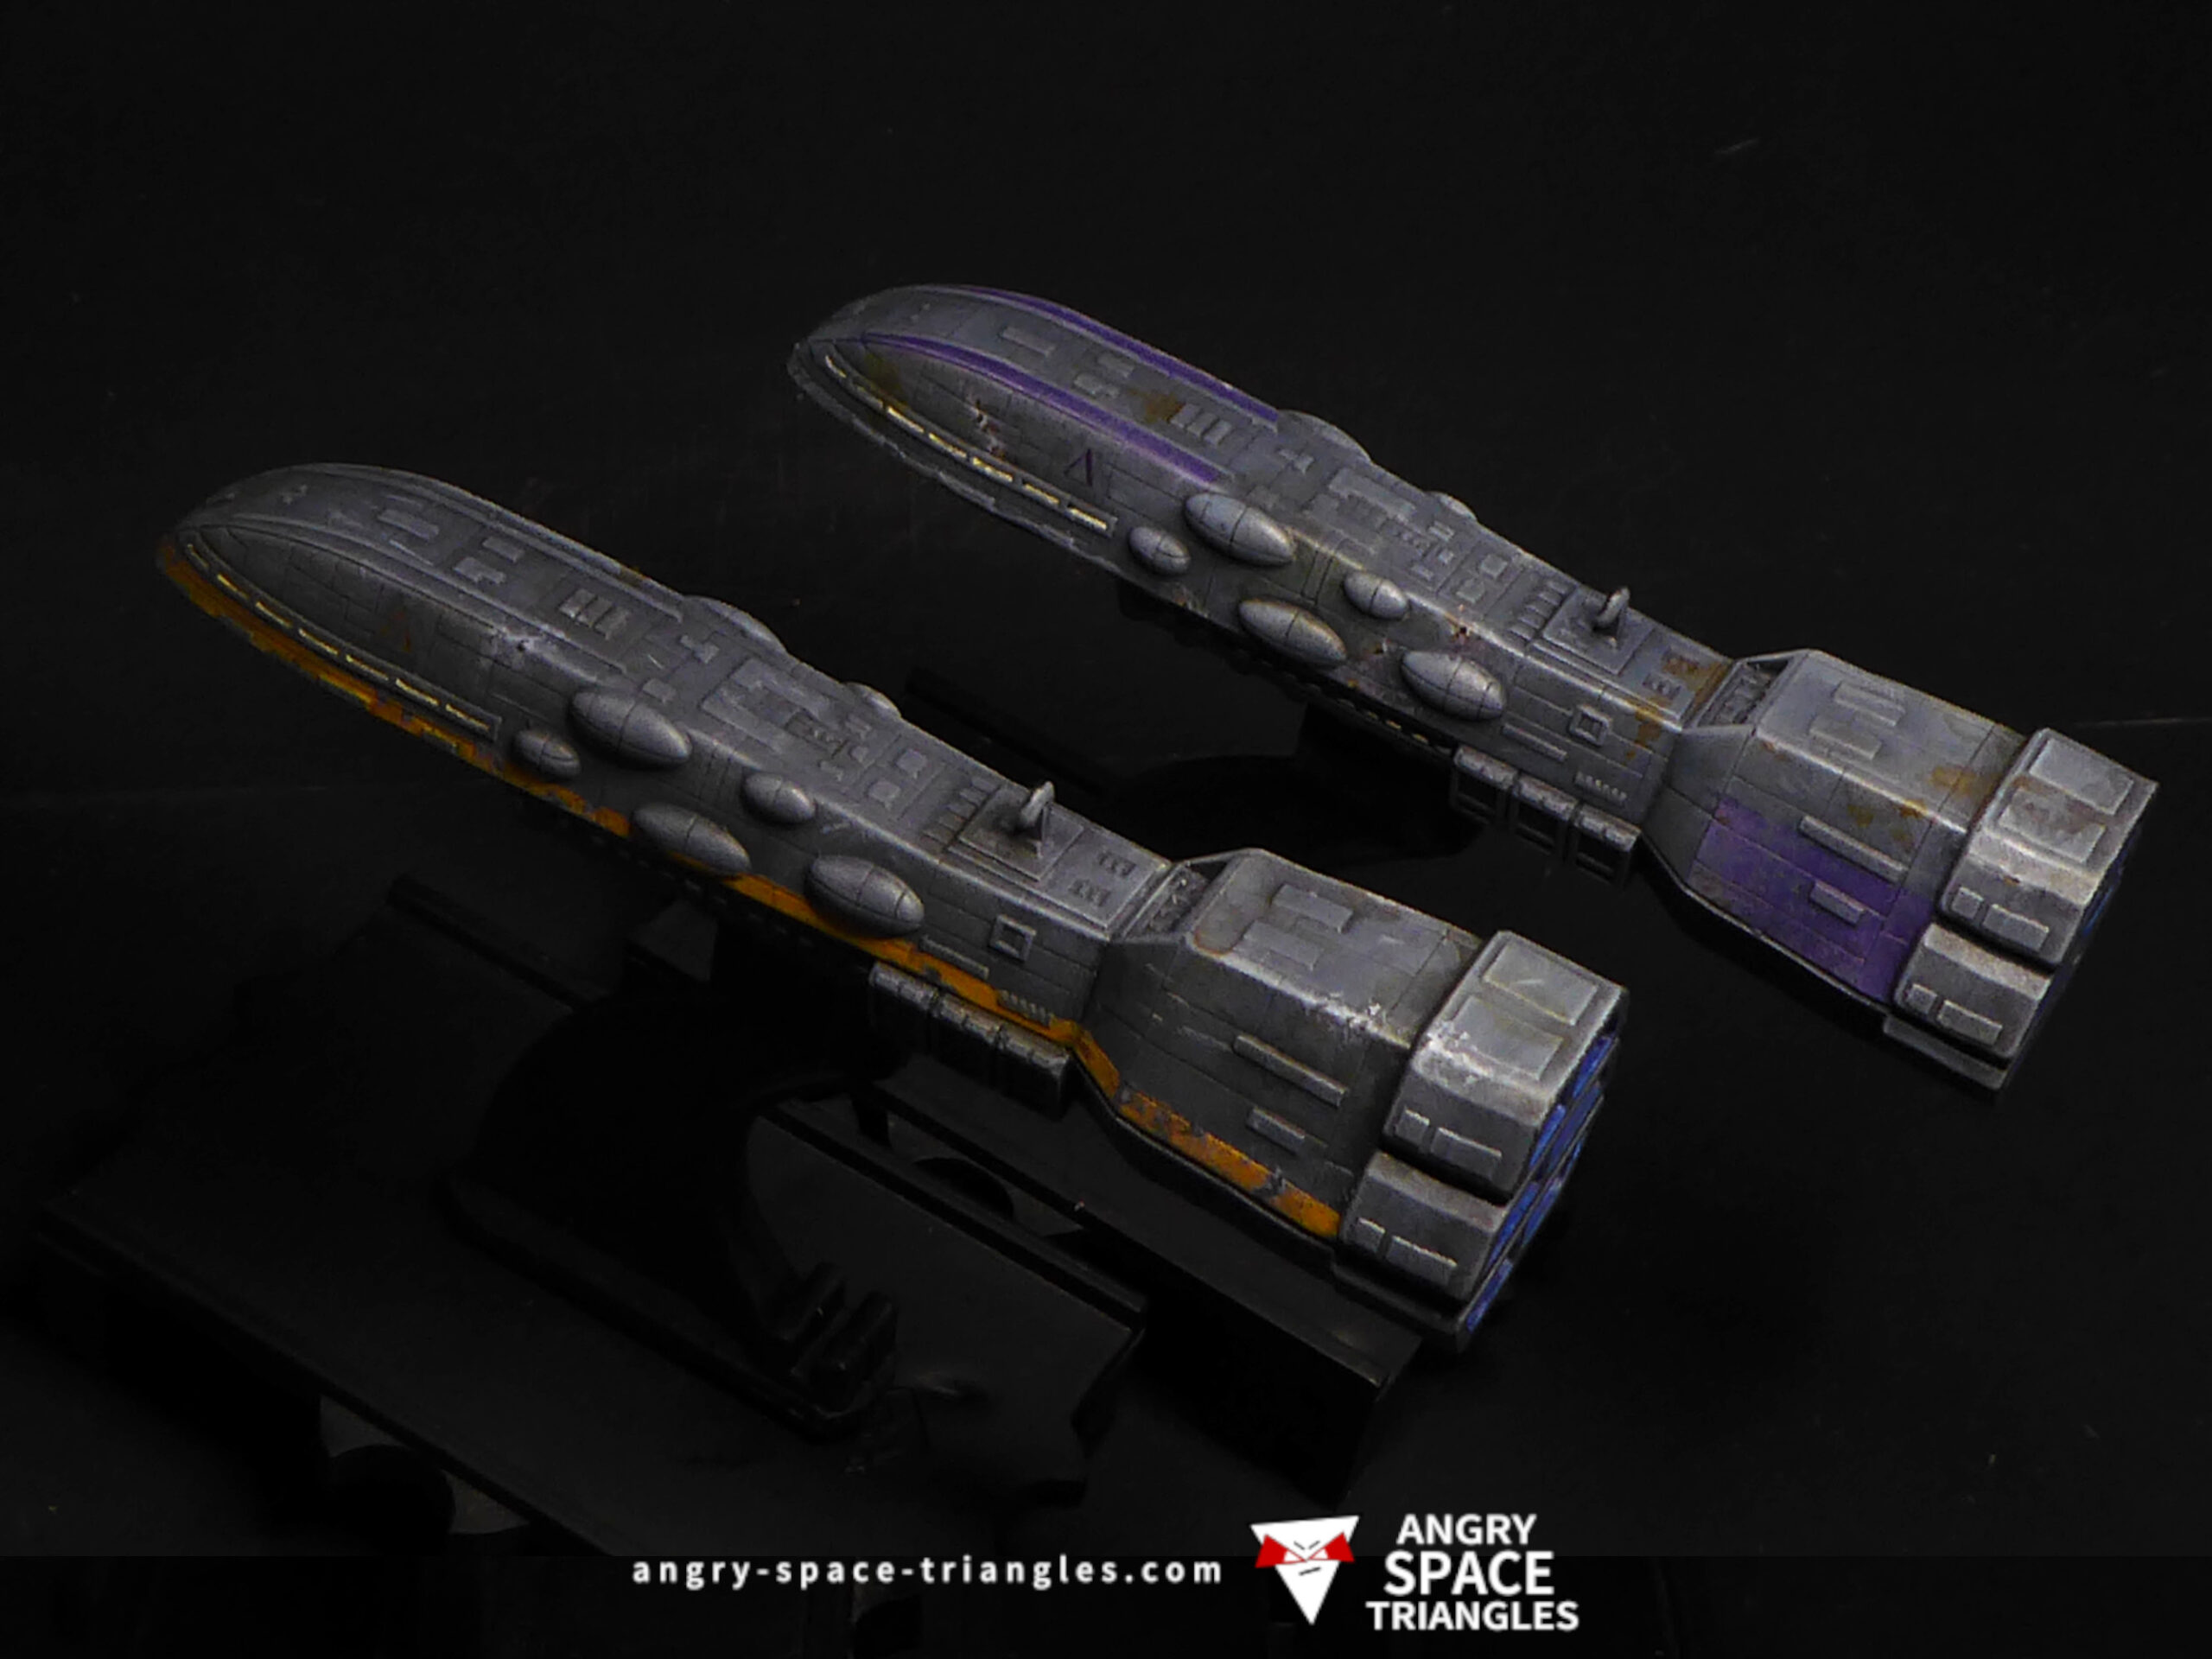 Painted Dreadnought-class Heavy Cruisers for Star Wars Armada